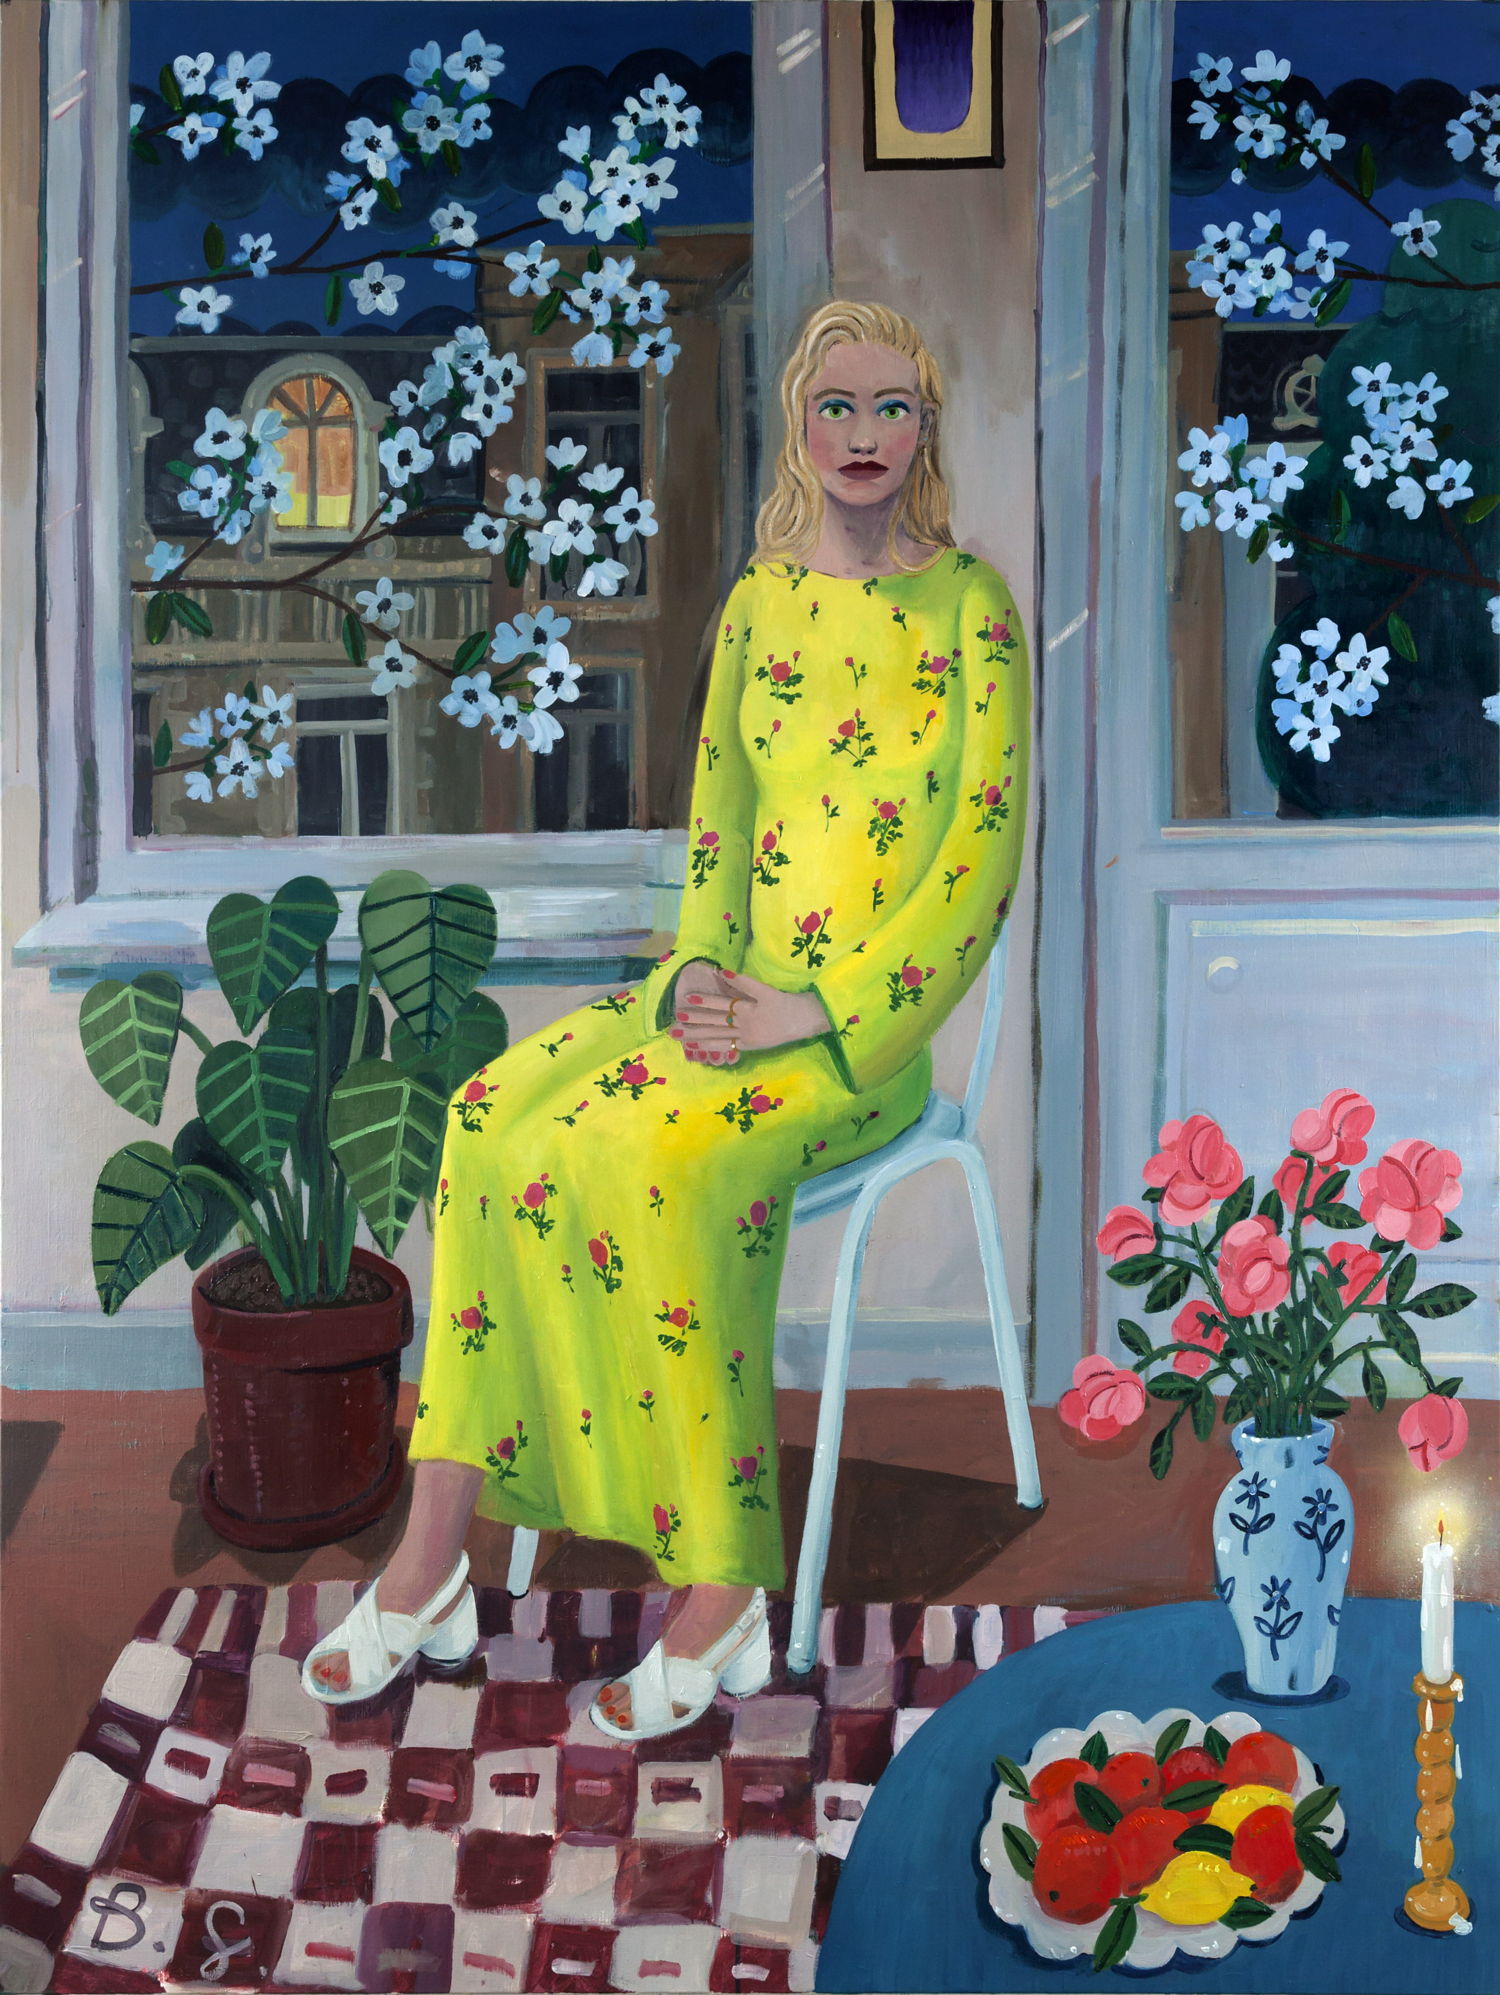 BEN SLEDSENS, Girl in the Yellow Flower Dress, 2018. Oil, acrylic and spraypaint on canvas, 200 x 150 cm. Courtesy Tim Van Laere Gallery, Antwerp
